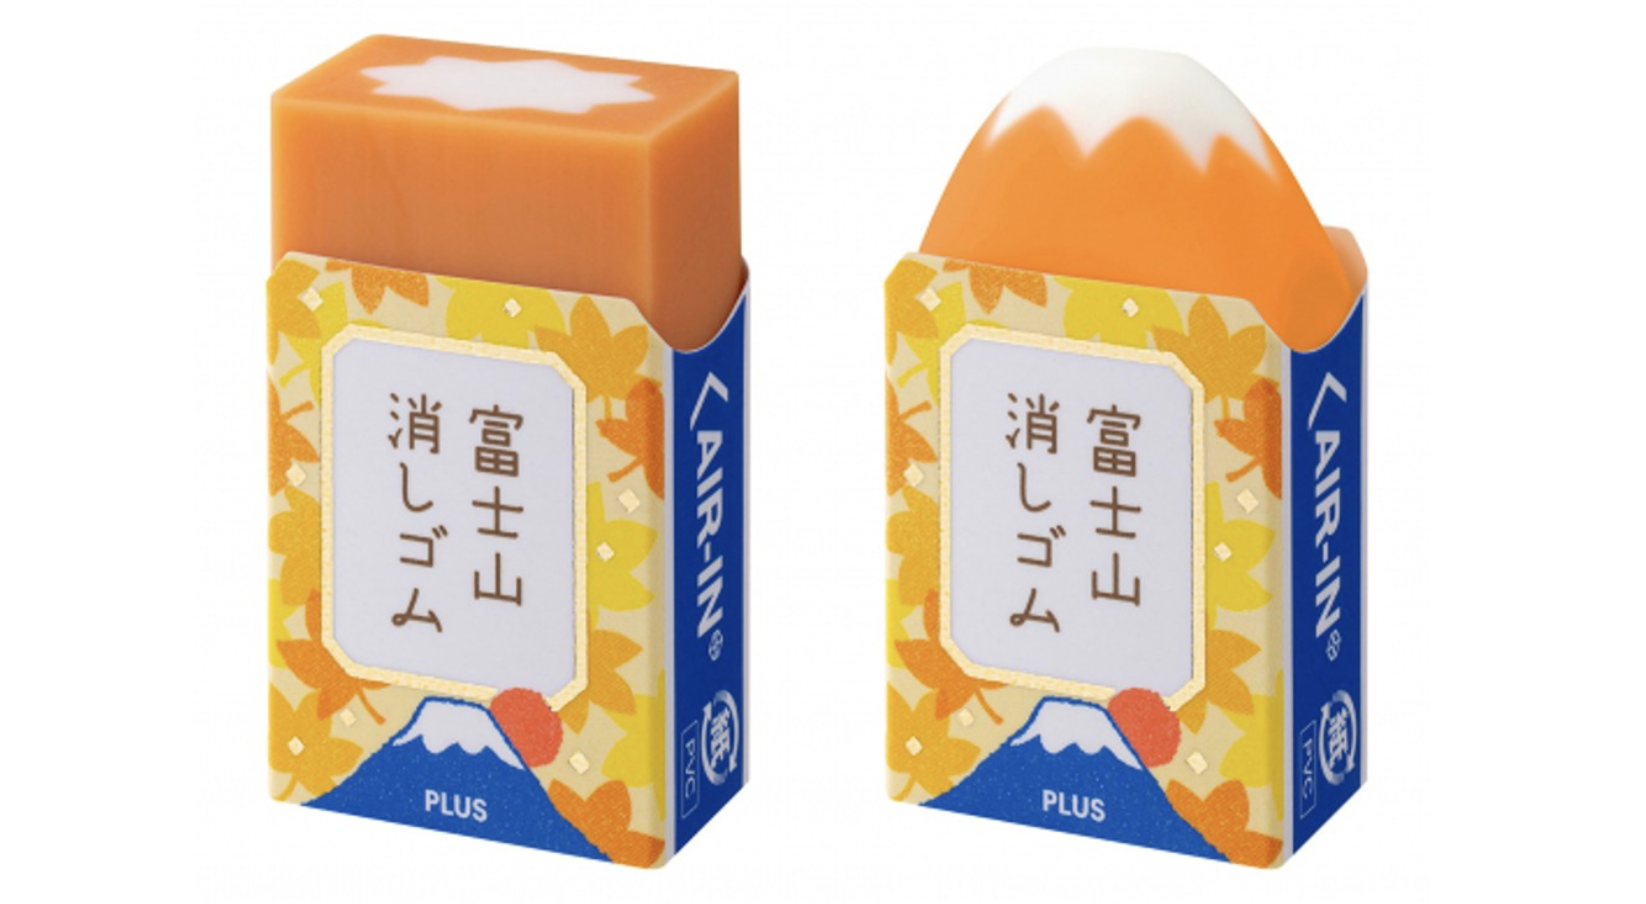 Every mistake you make reveals Mt Fuji with these clever transforming  erasers - Japan Today